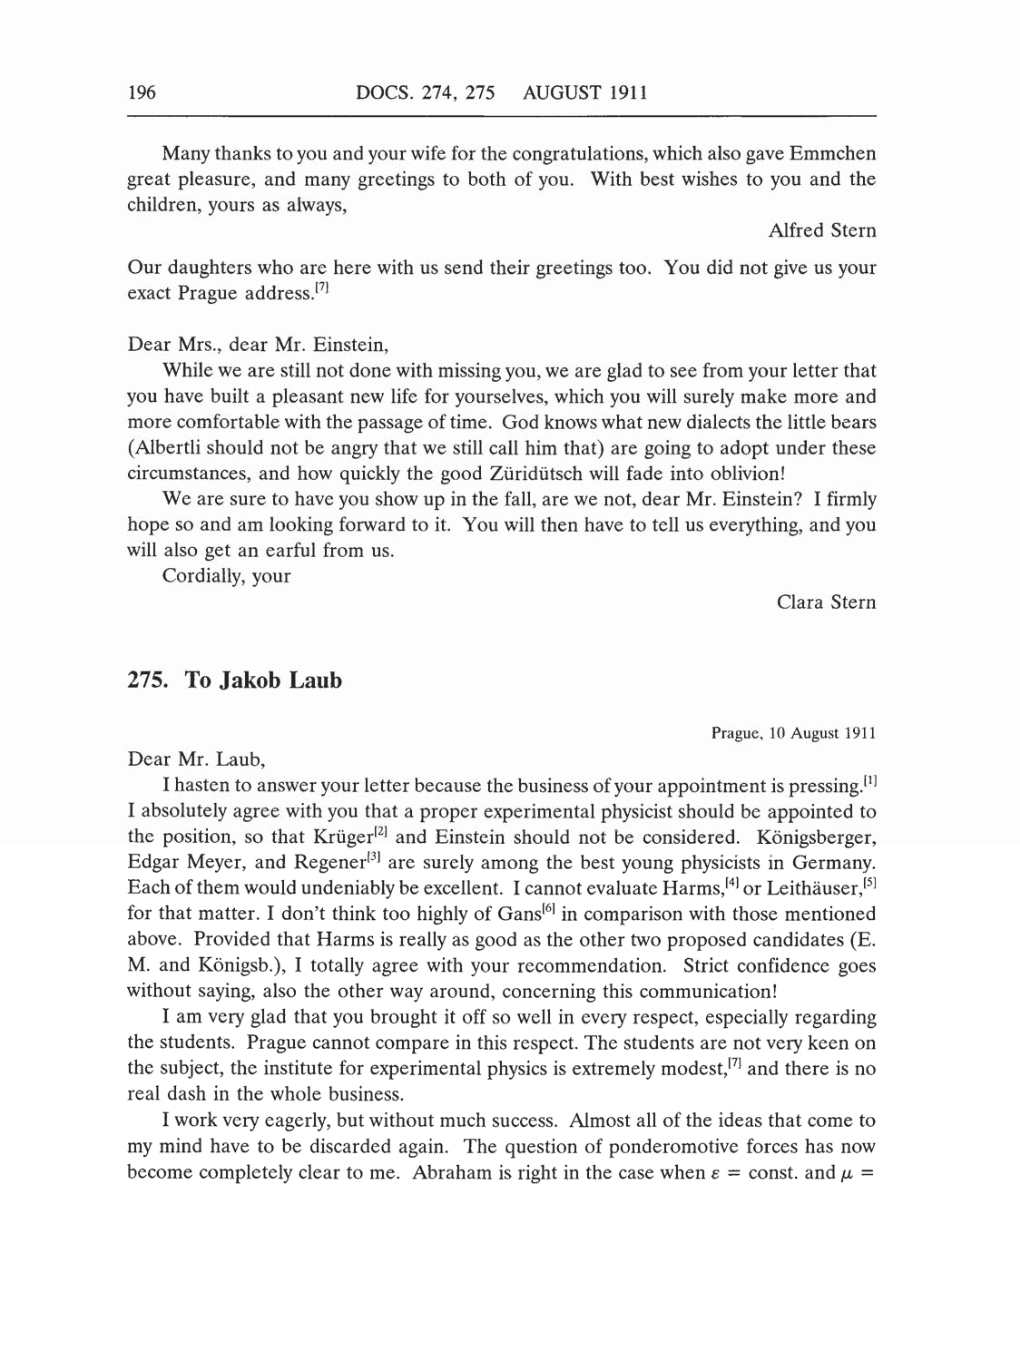 Volume 5: The Swiss Years: Correspondence, 1902-1914 (English translation supplement) page 196